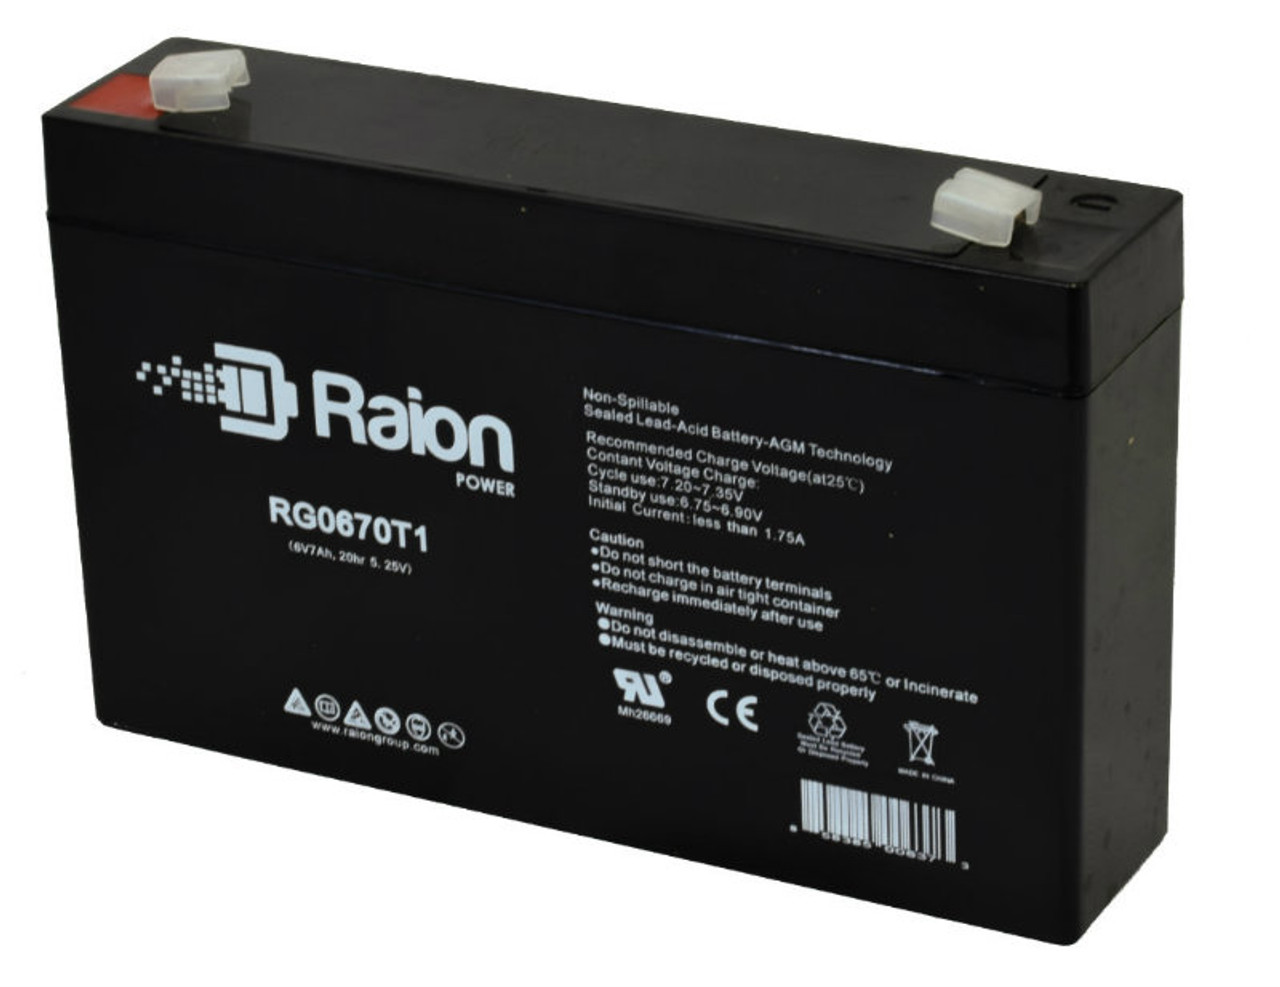 Raion Power RG0670T1 Replacement Battery for Canbat CBL7.2-6 OEM Battery